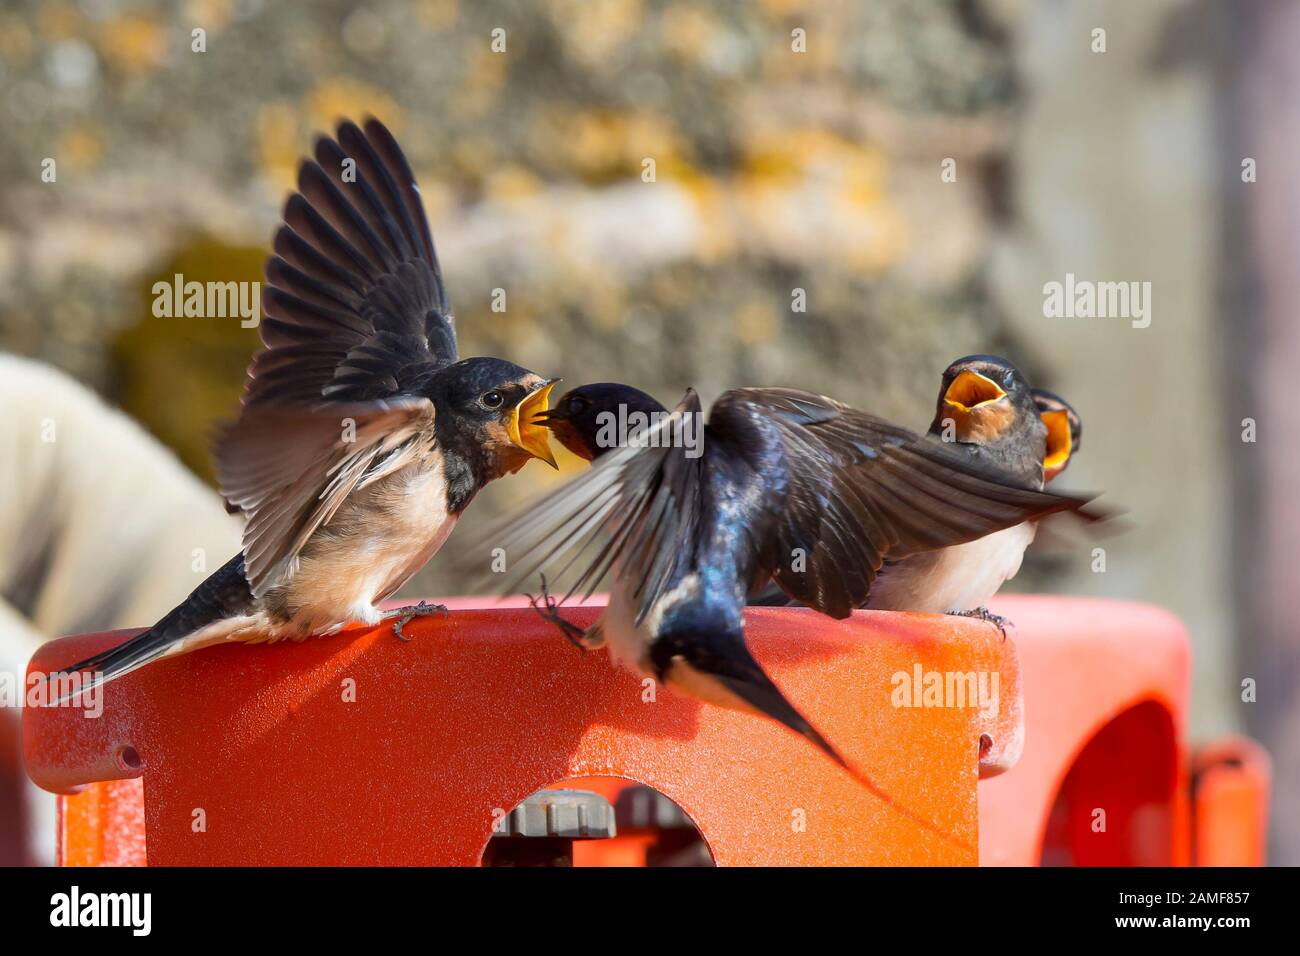 Close up wild, hungry UK barn swallow chicks (Hirundo rustica) beaks open being fed by parent bird. Baby birds calling for food. UK swallows in summer. Stock Photo